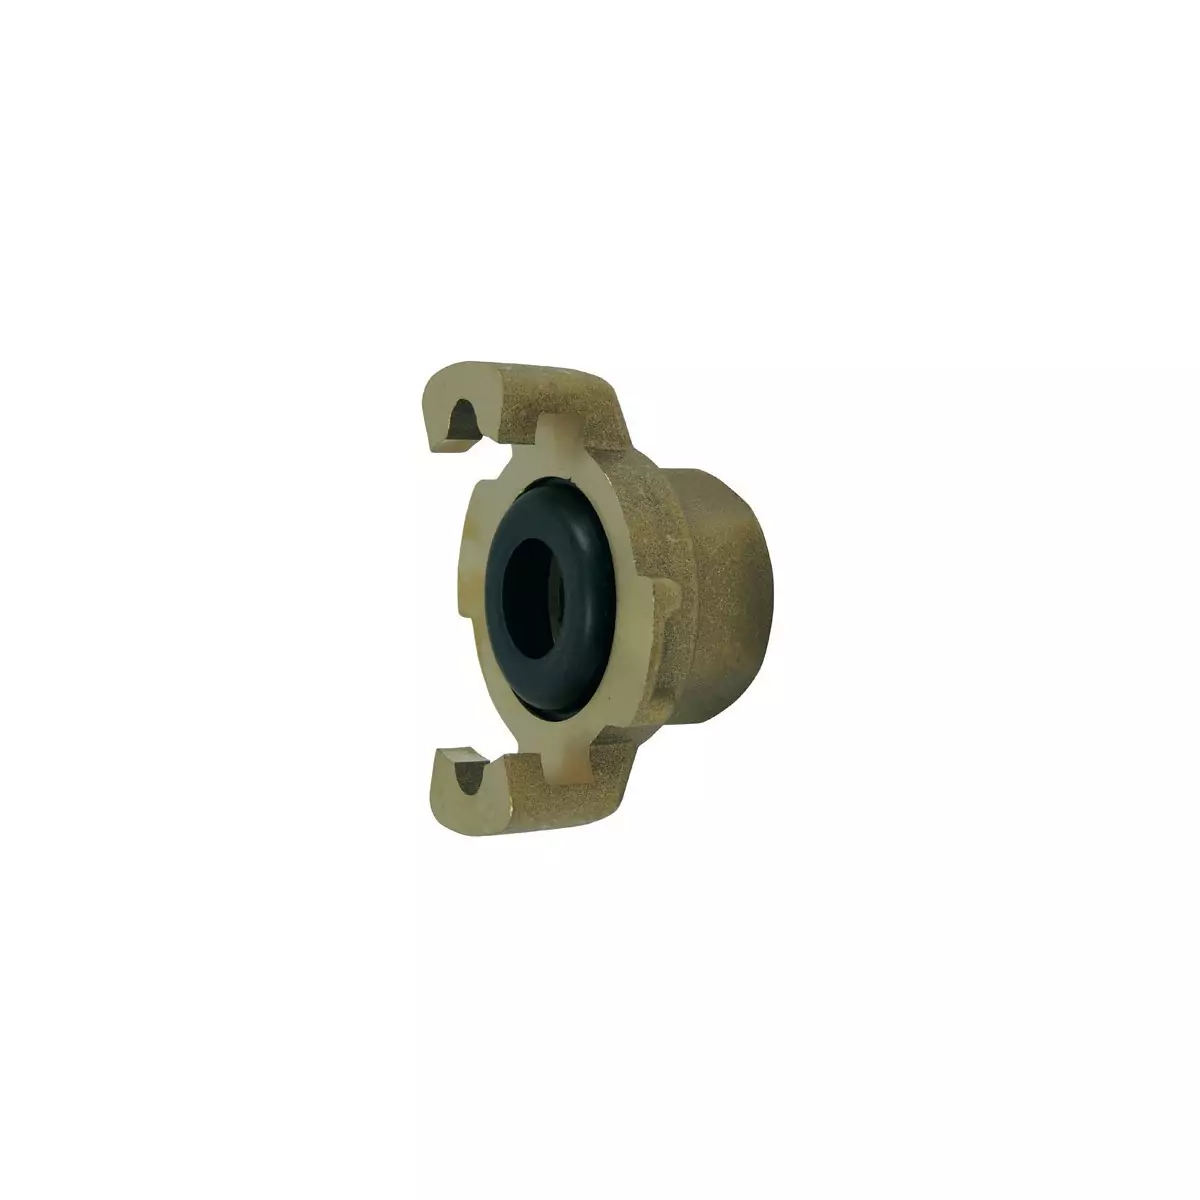 Express fitting with threaded end, with gasket